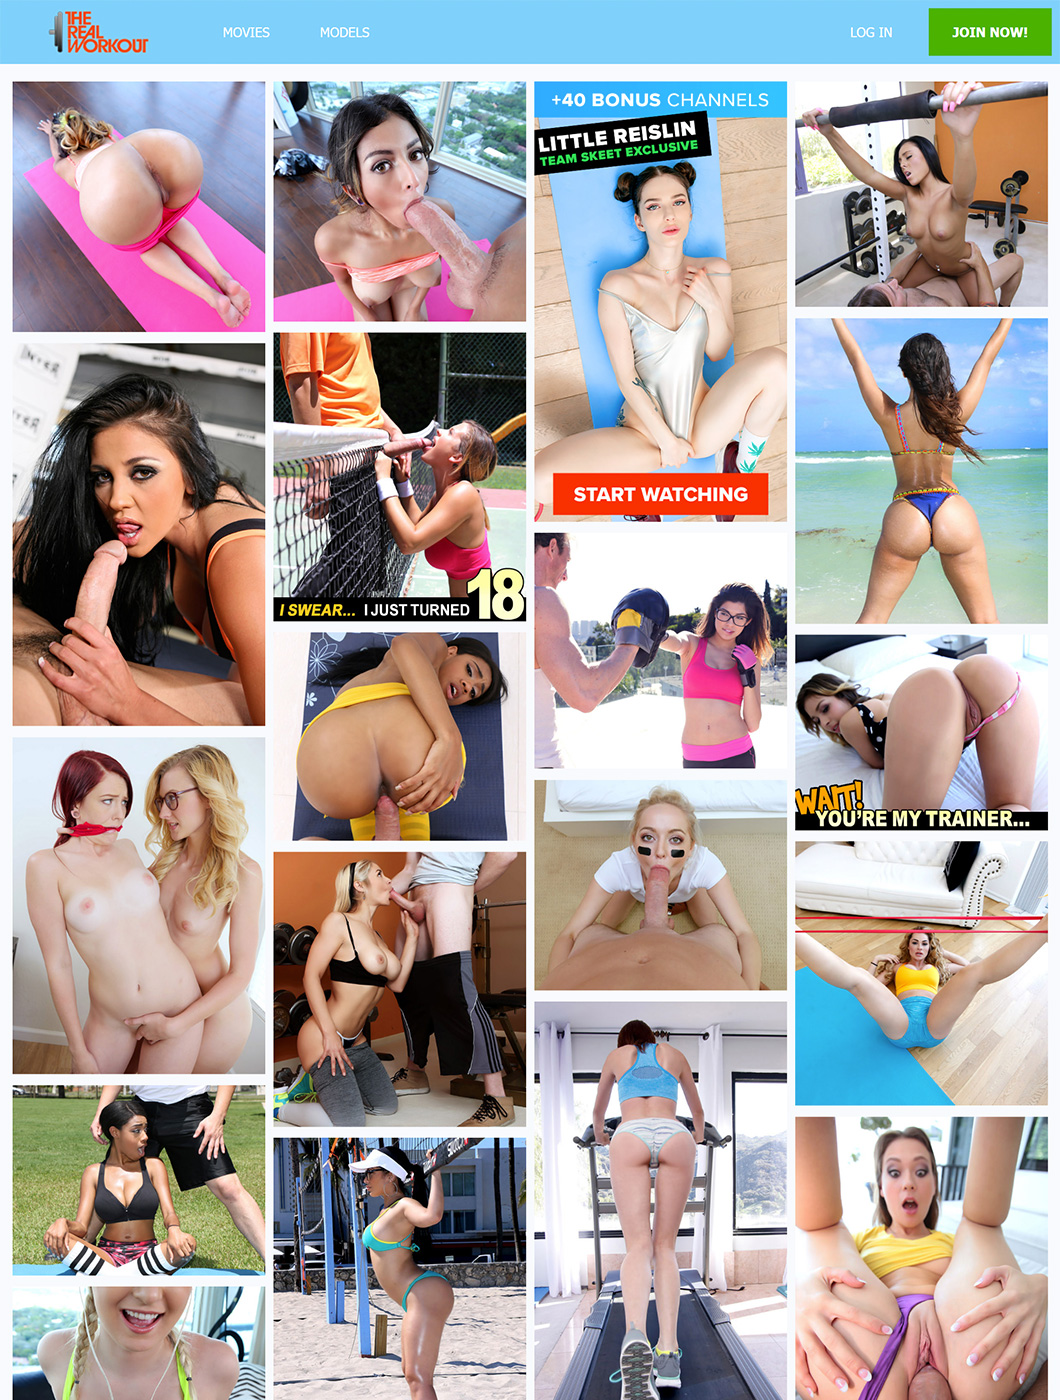 The Real Workout Hd - The Real Workout - Fitness Porn Sites â€” Therealworkout.com